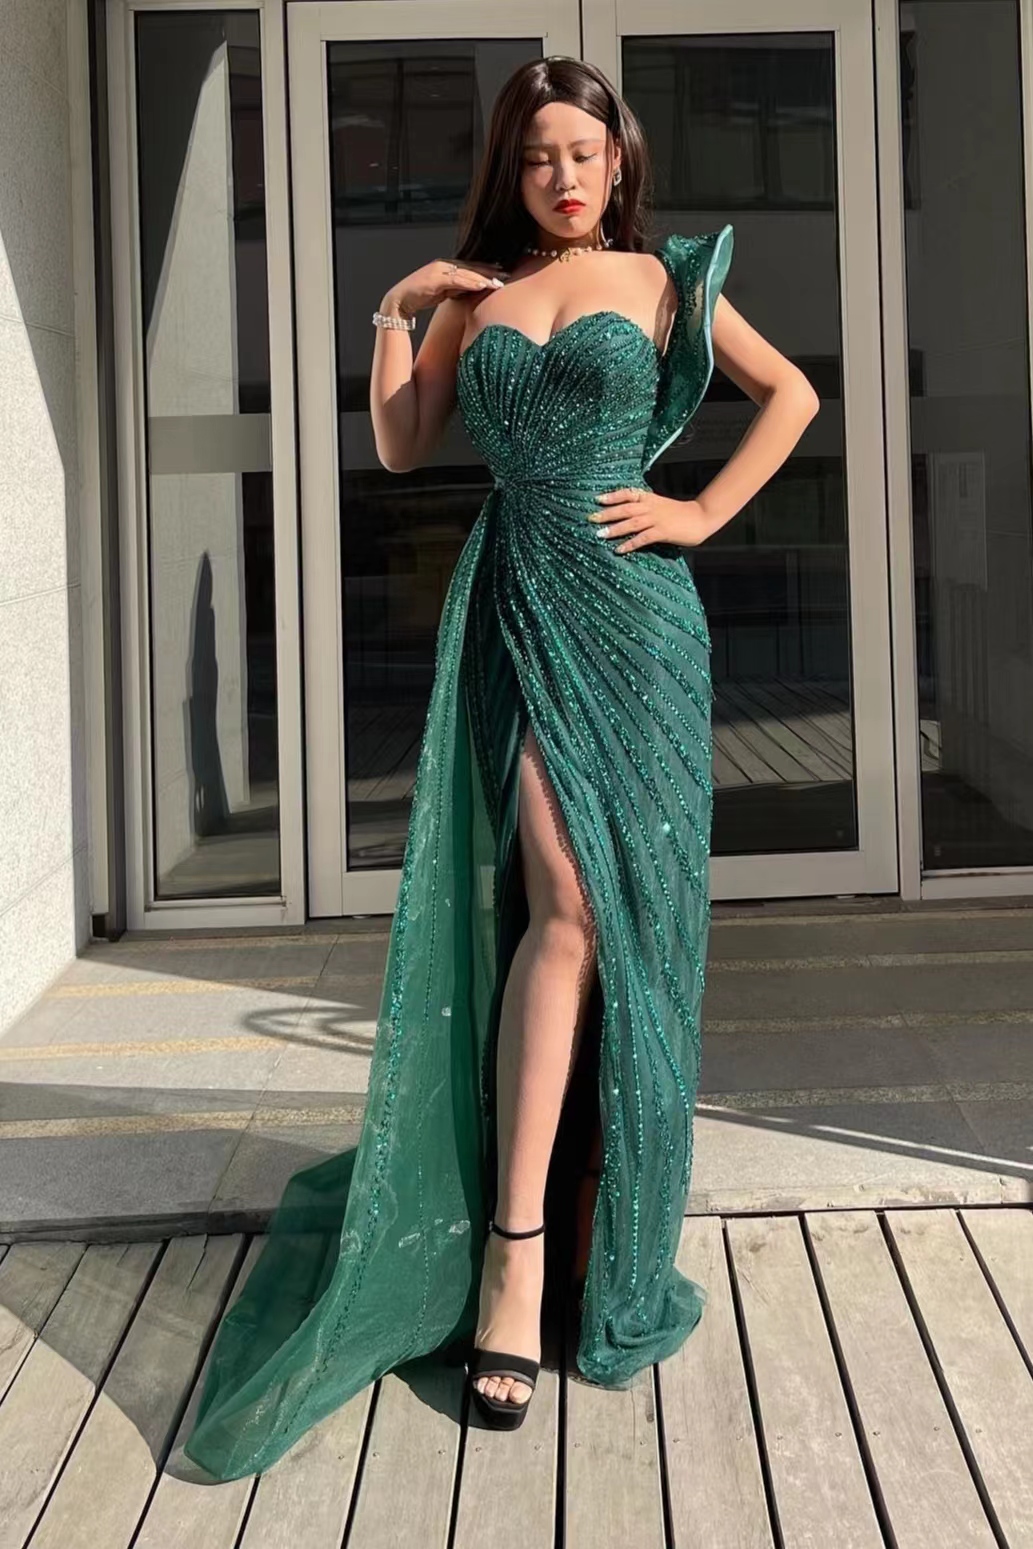 Glamorous Emerald Sweetheart Mermaid Prom Dress One Shoulder With Slit Sequins |Risias